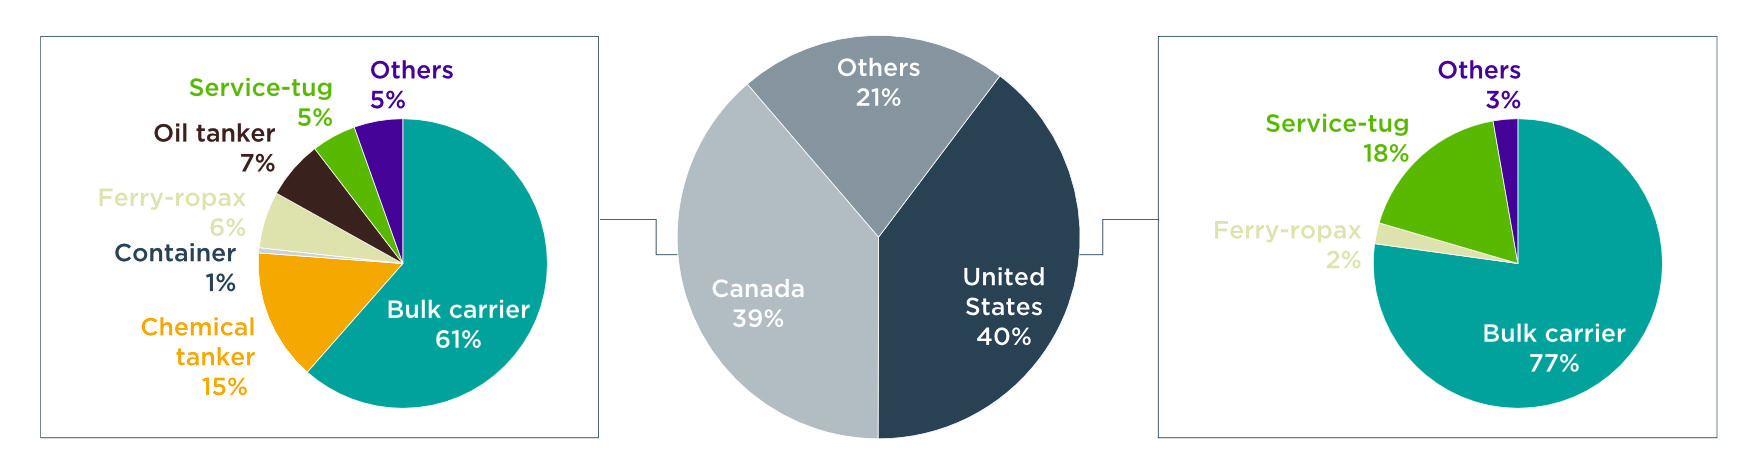 pie charts showing shares of CO2 emissions from the two countries by vessel type